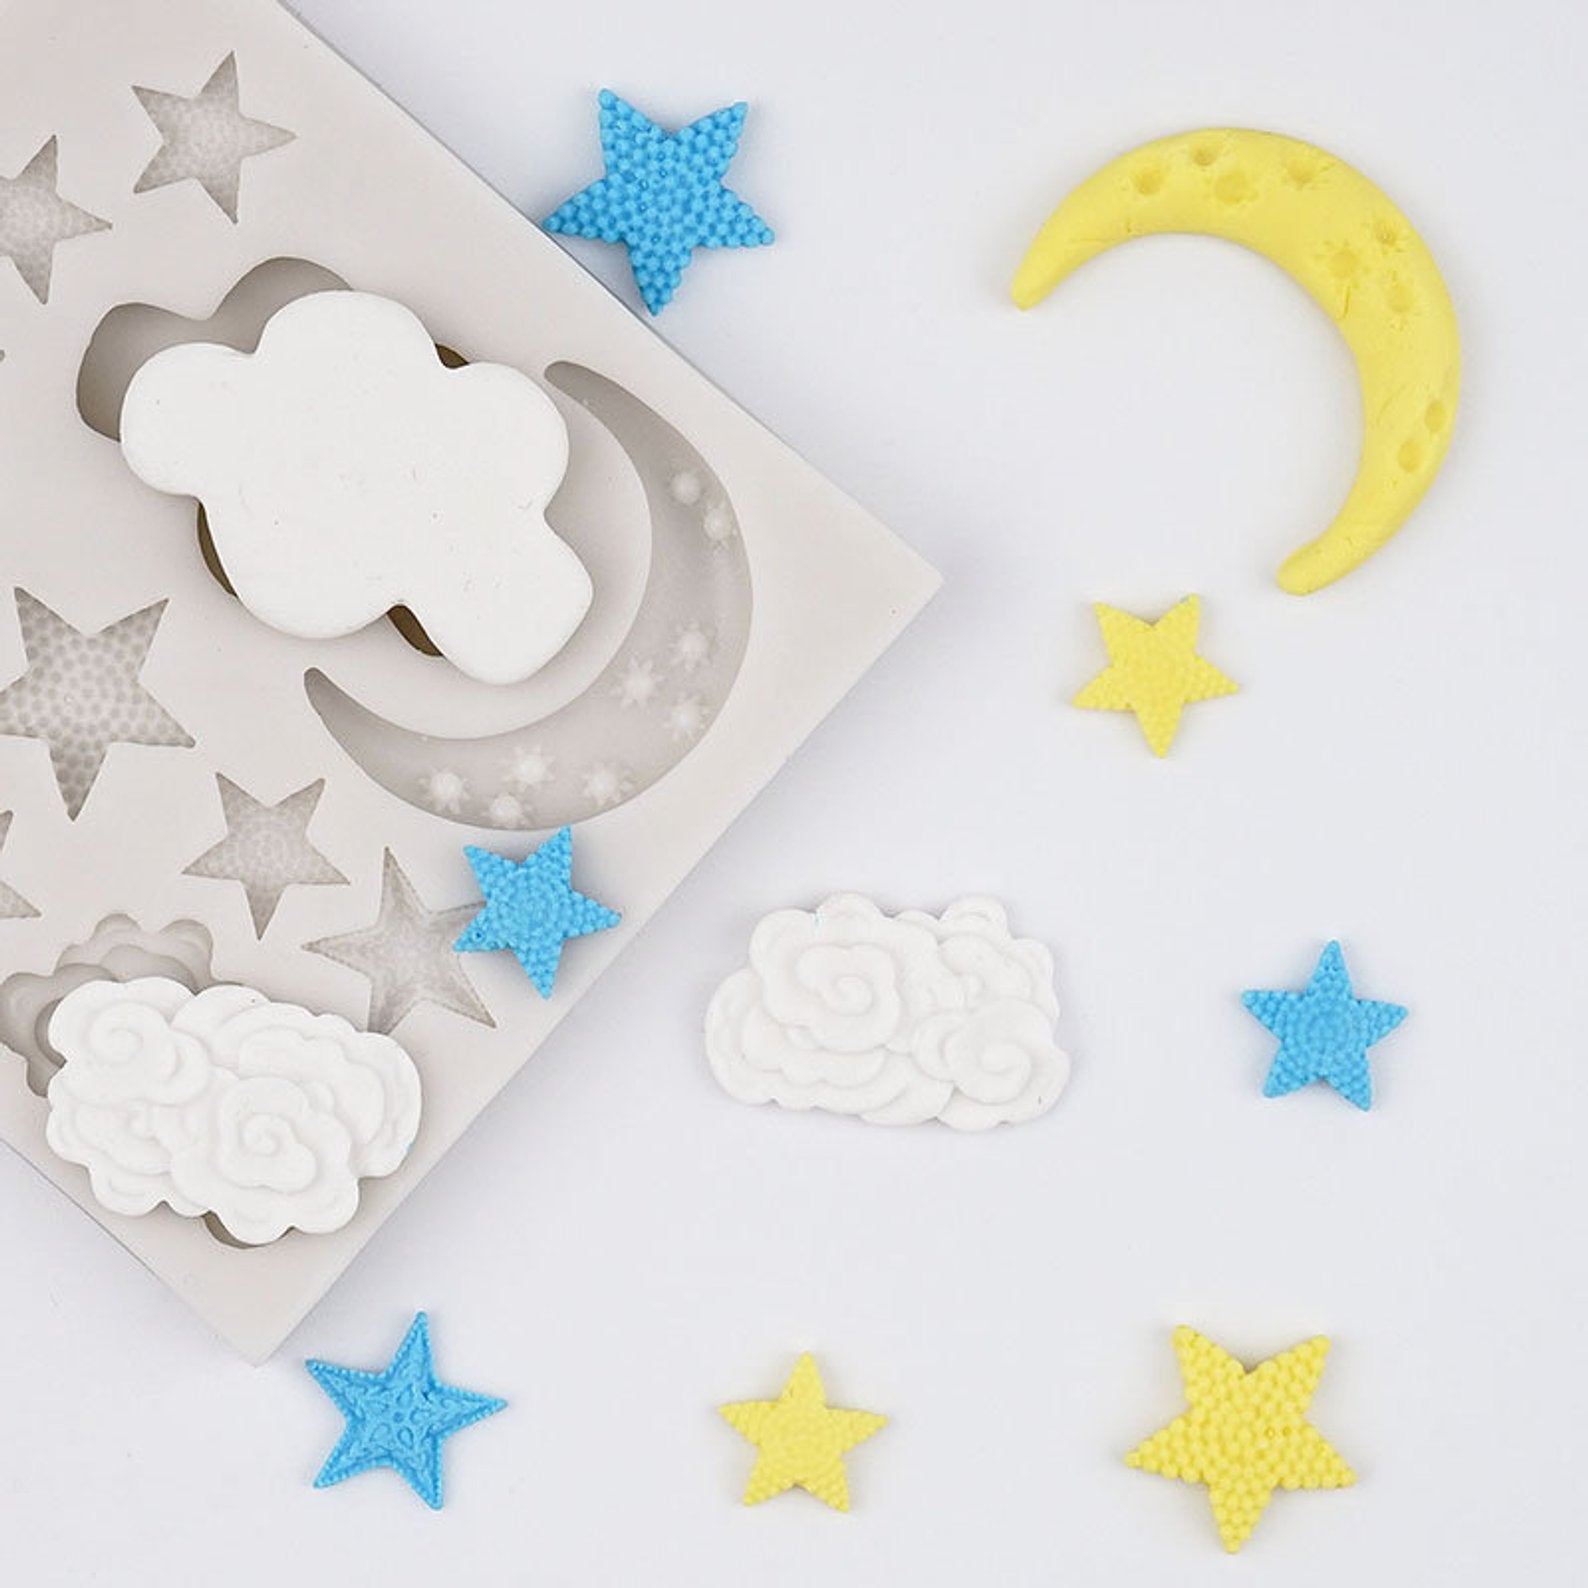 Moon, Stars & Clouds – Silicone Mold